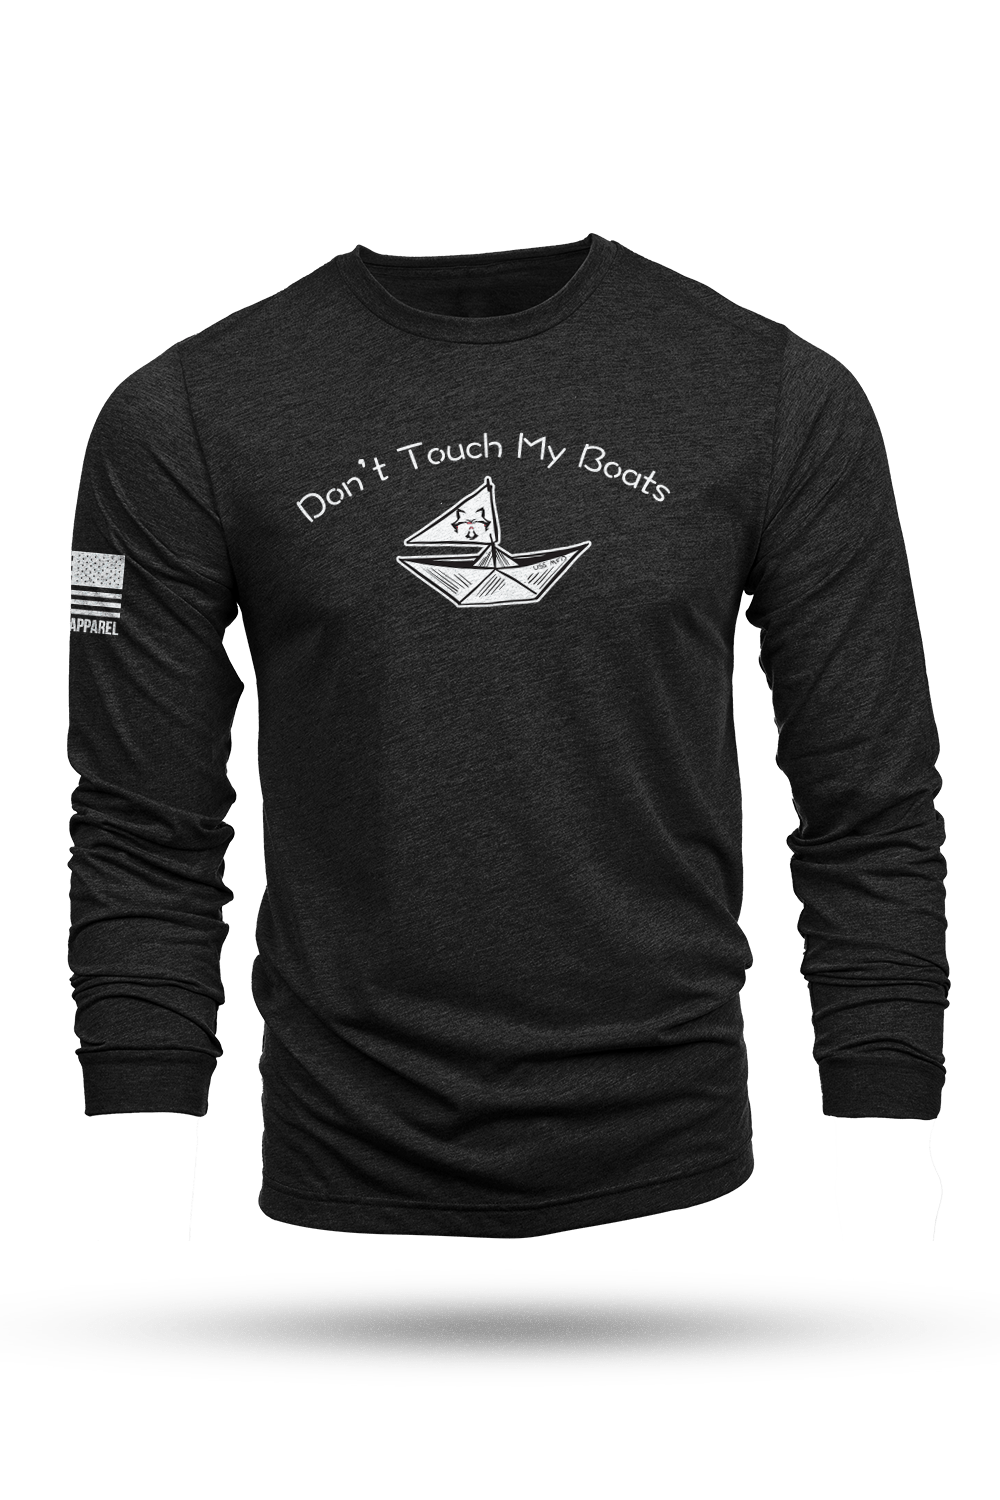 Long-Sleeve Shirt - Don't Touch My Boats